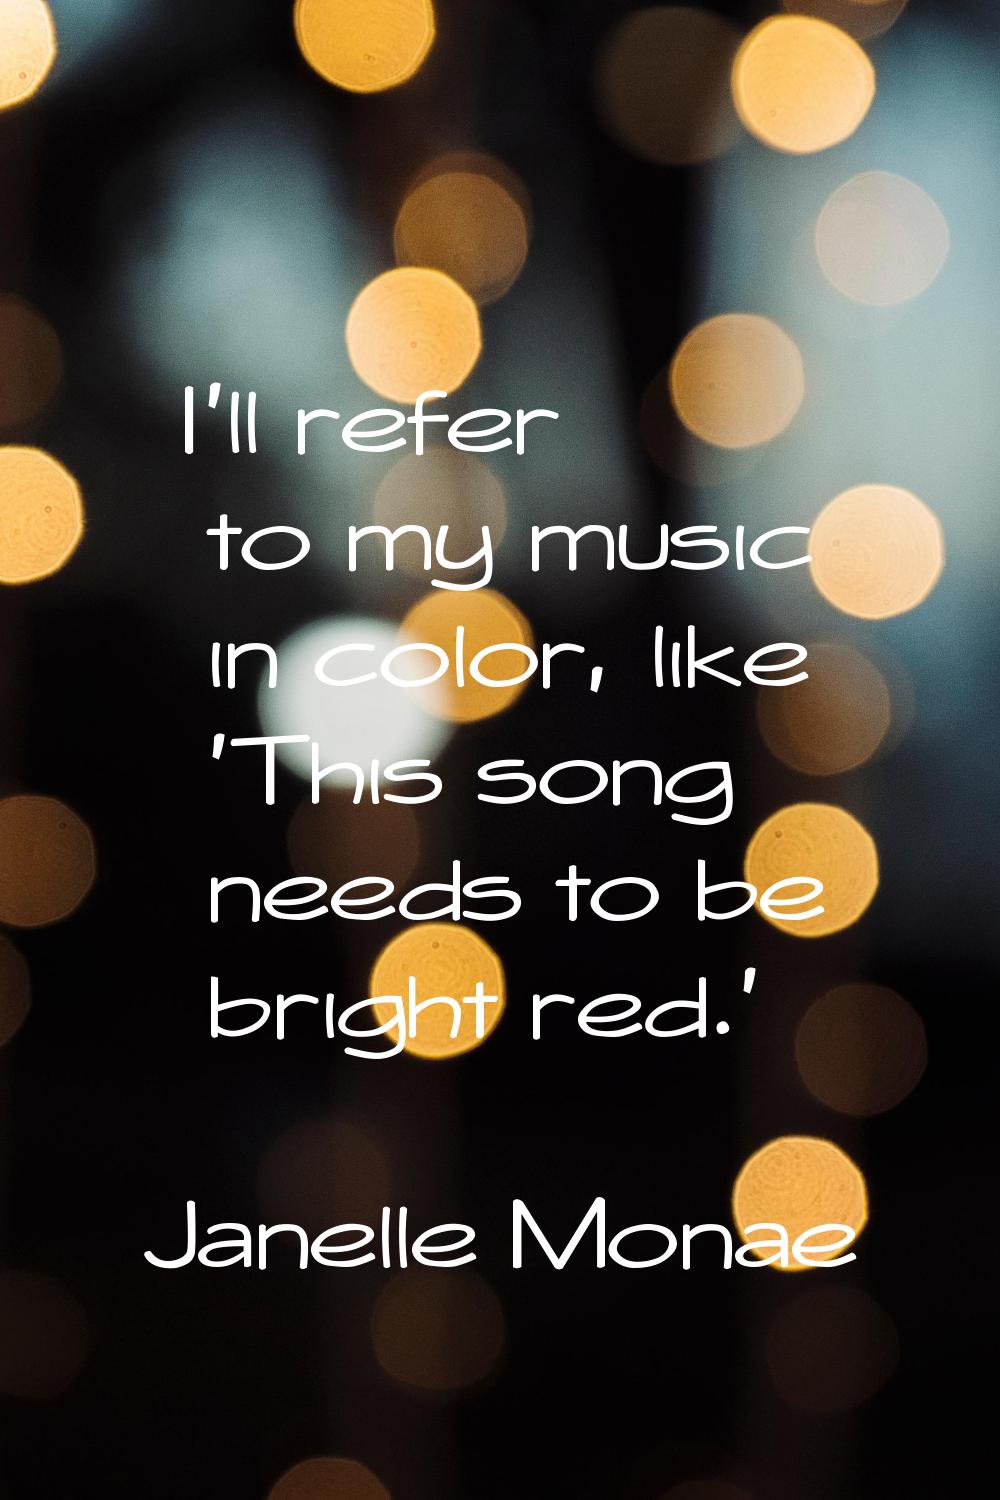 I'll refer to my music in color, like 'This song needs to be bright red.'